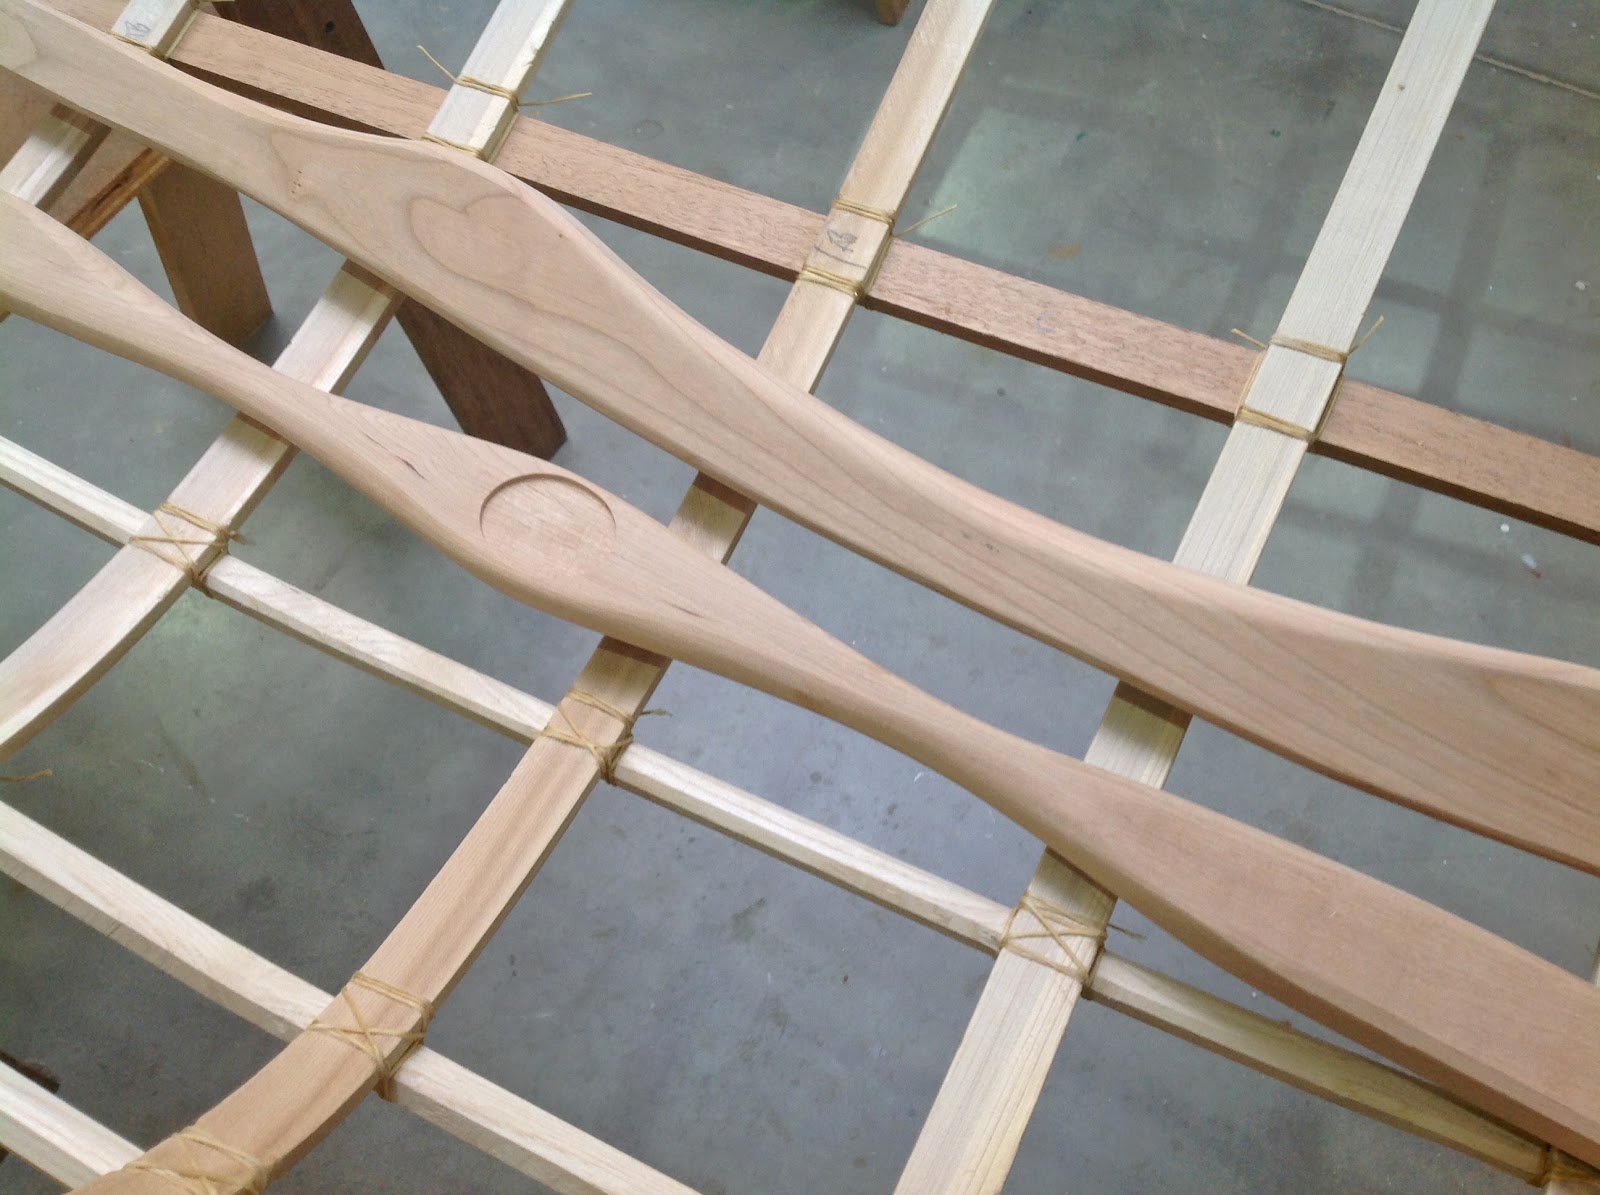 sarum boats: frames nearly done.....